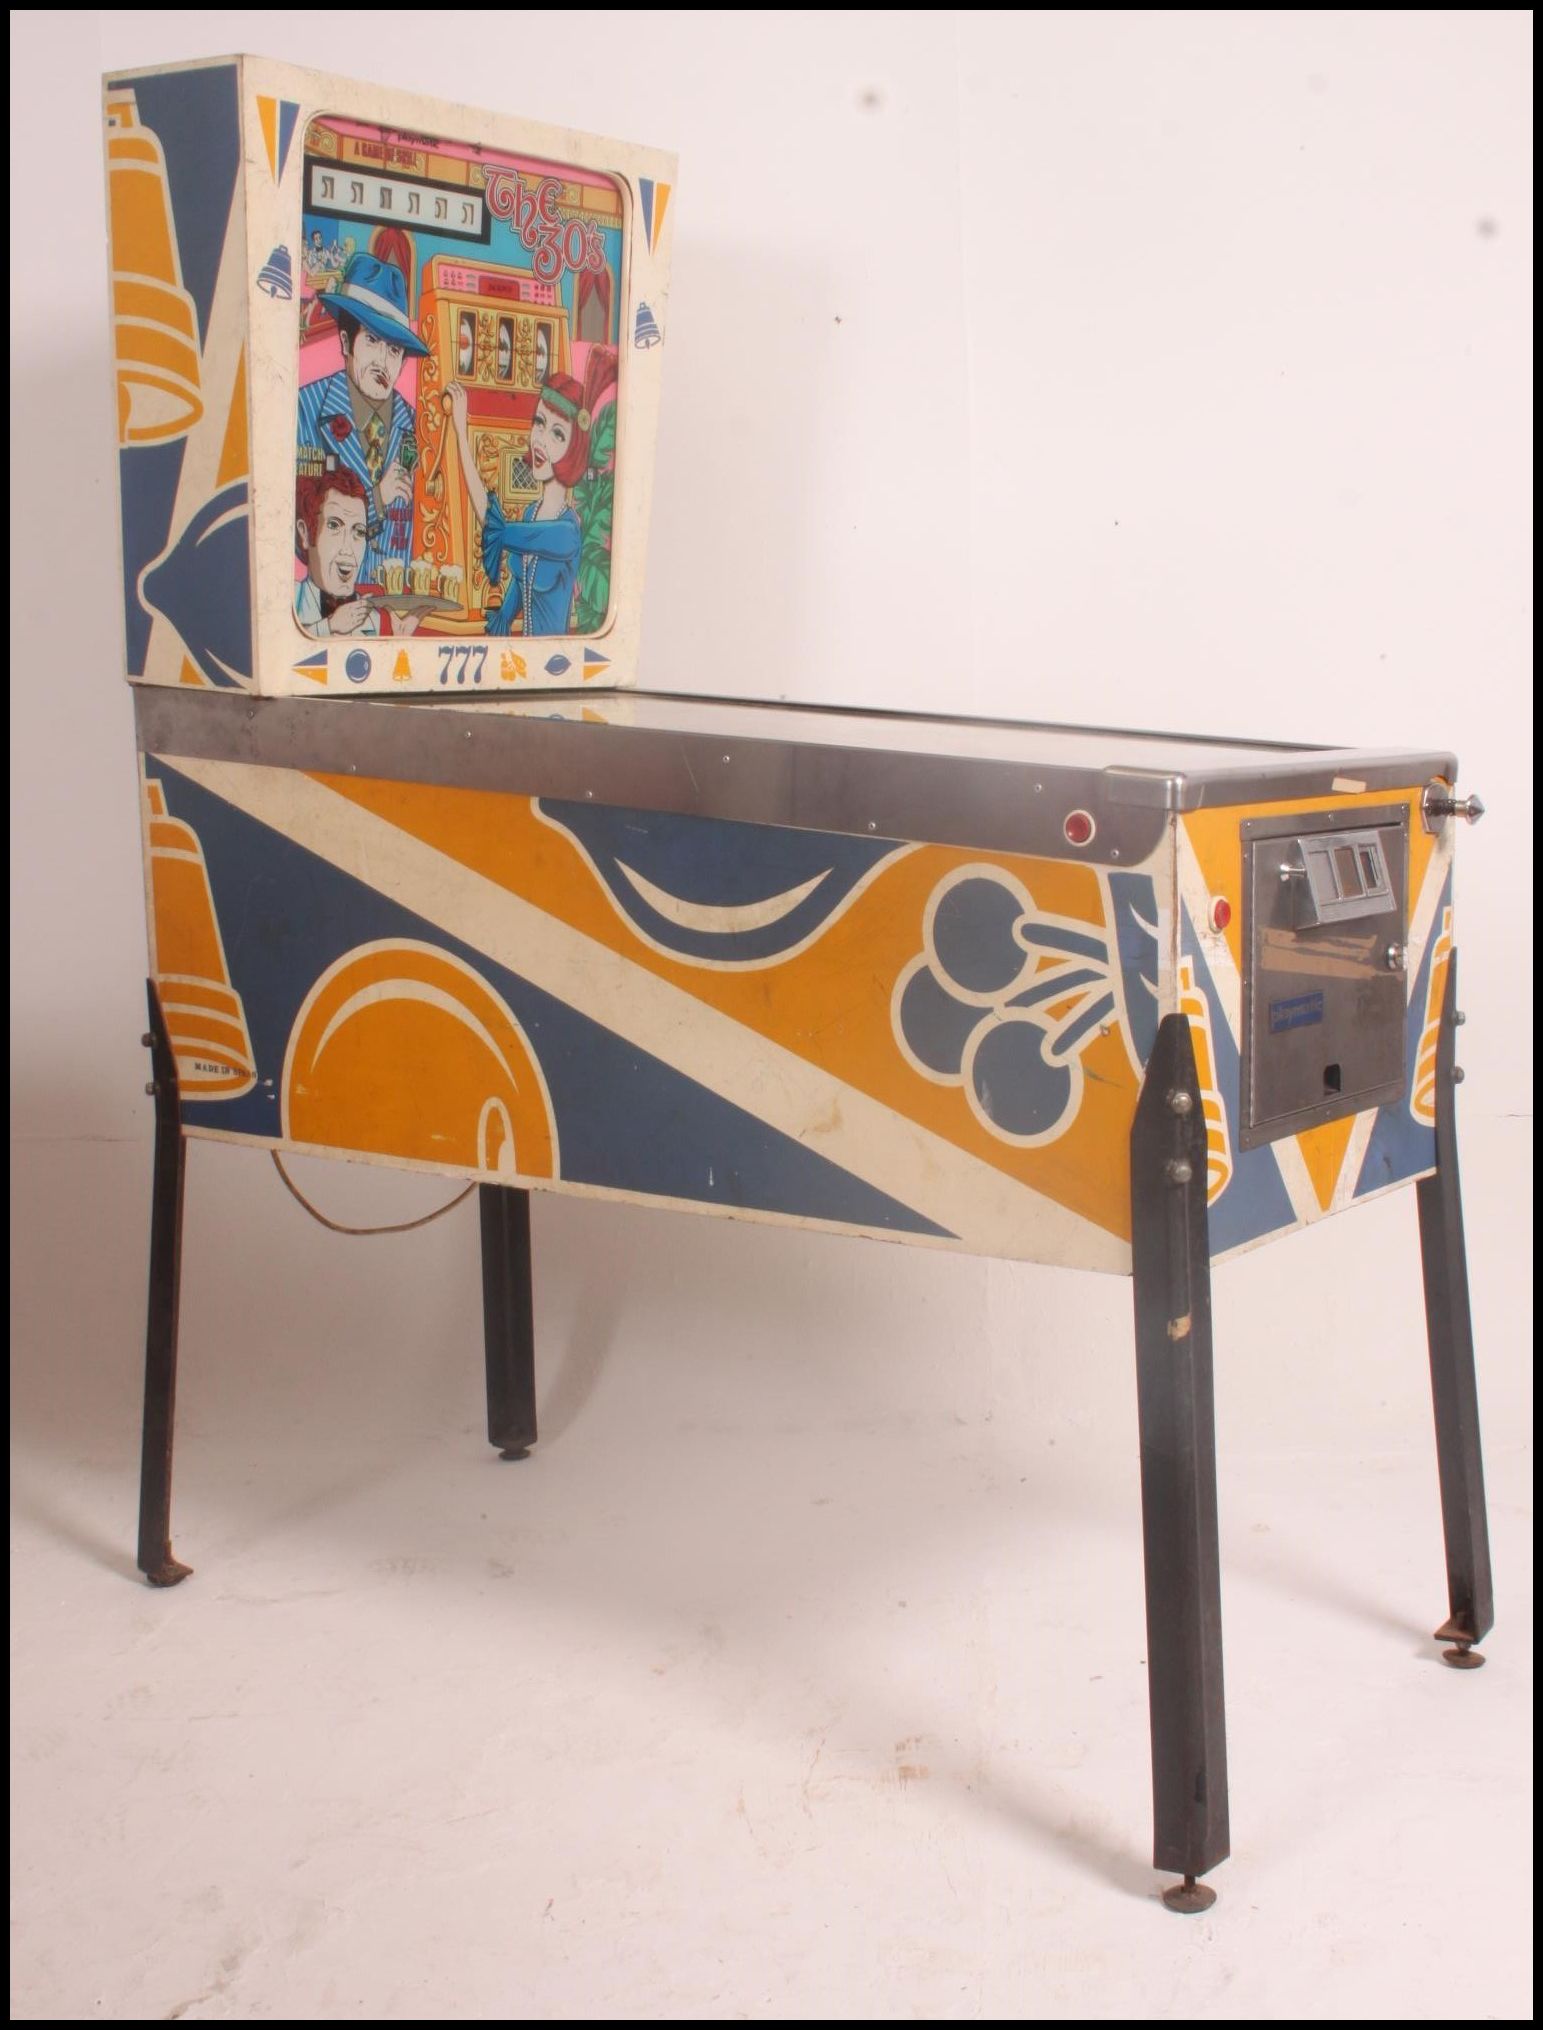 A 1977 Playmatic 777 ' The 30's ' Pinball Machine ( Pin Ball ) dating to the 1970's raised on